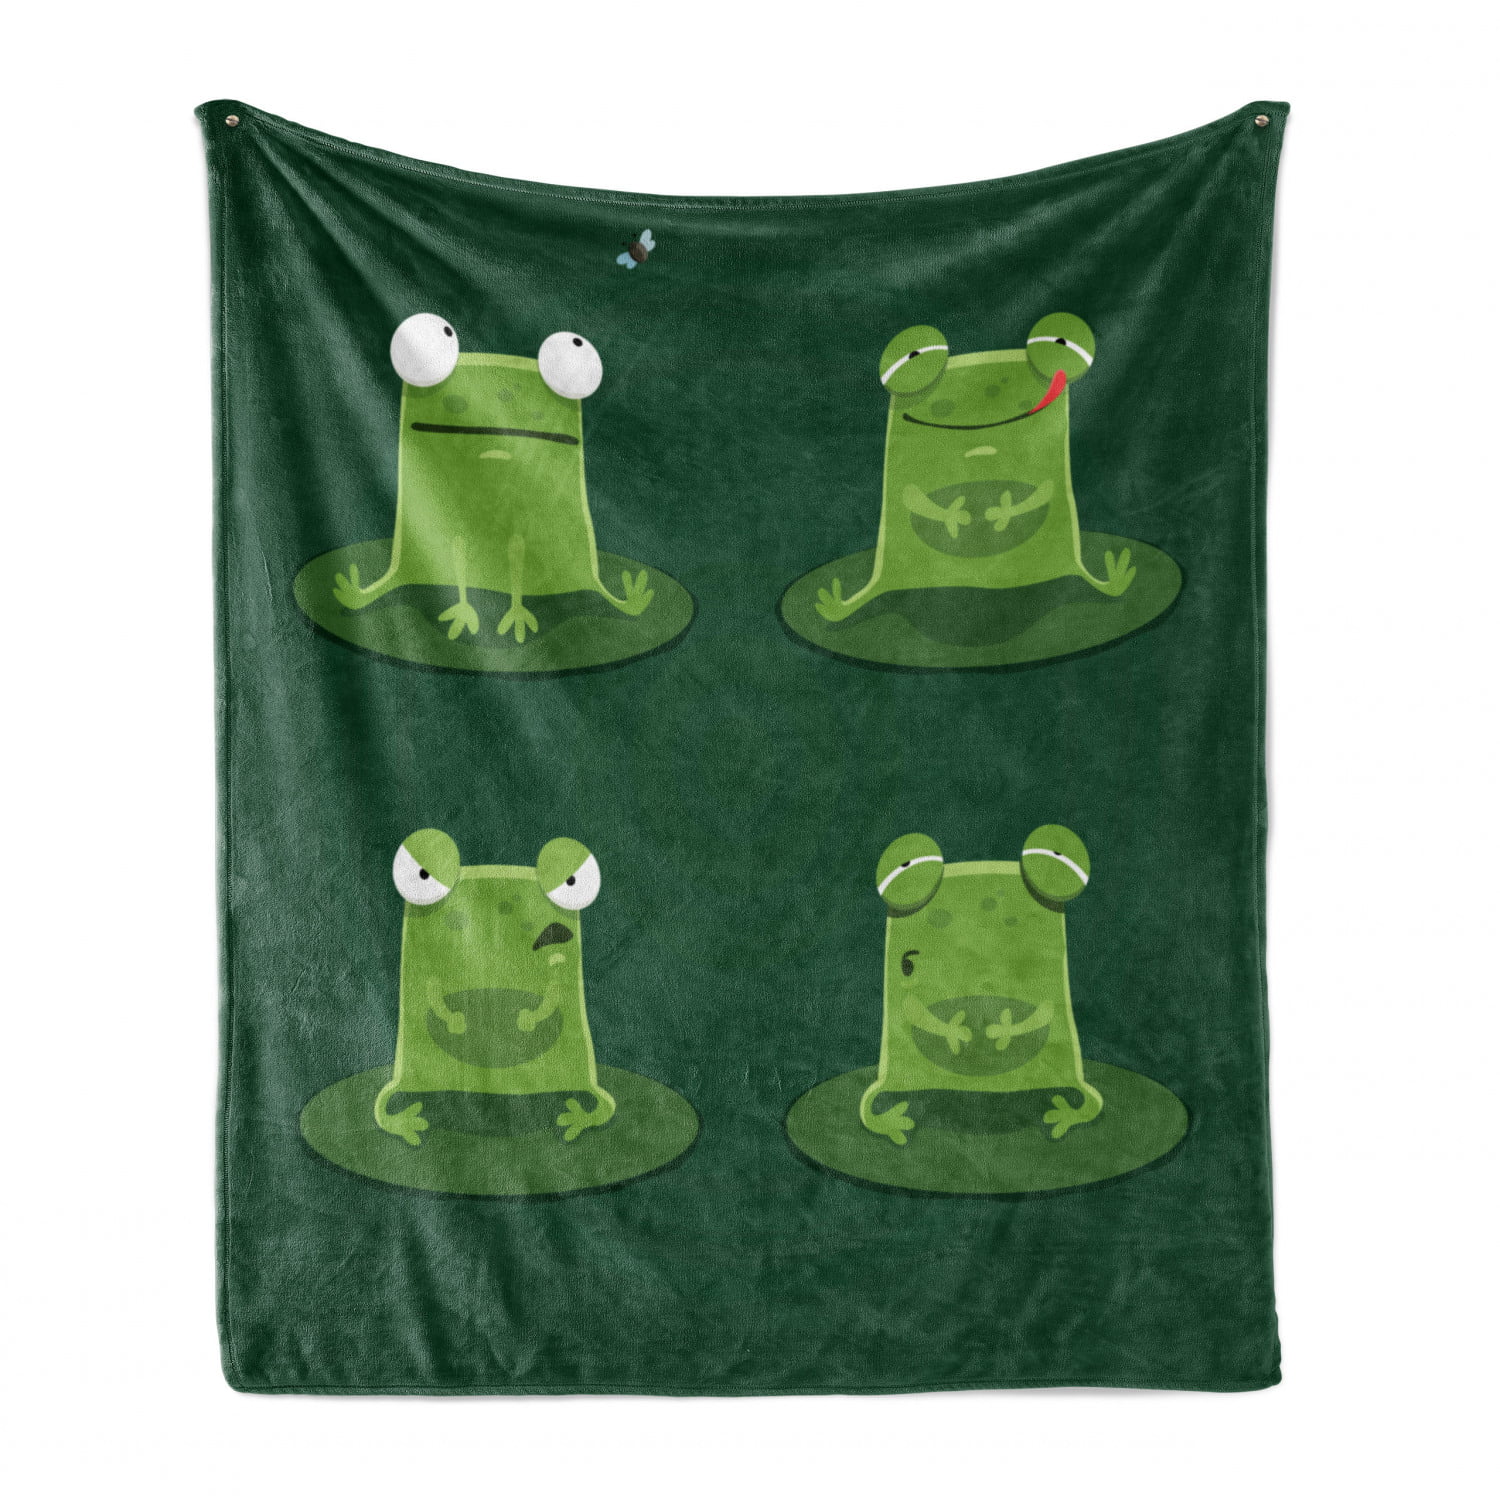 Frog Shadow Sherpa Flannel Throw Blankets Thick Reversible Plush Fleece Blanket for Bed Couch Sofa Decor Green Leaf Texture,Ultra Soft Comfy Warm Fuzzy TV Blanket 